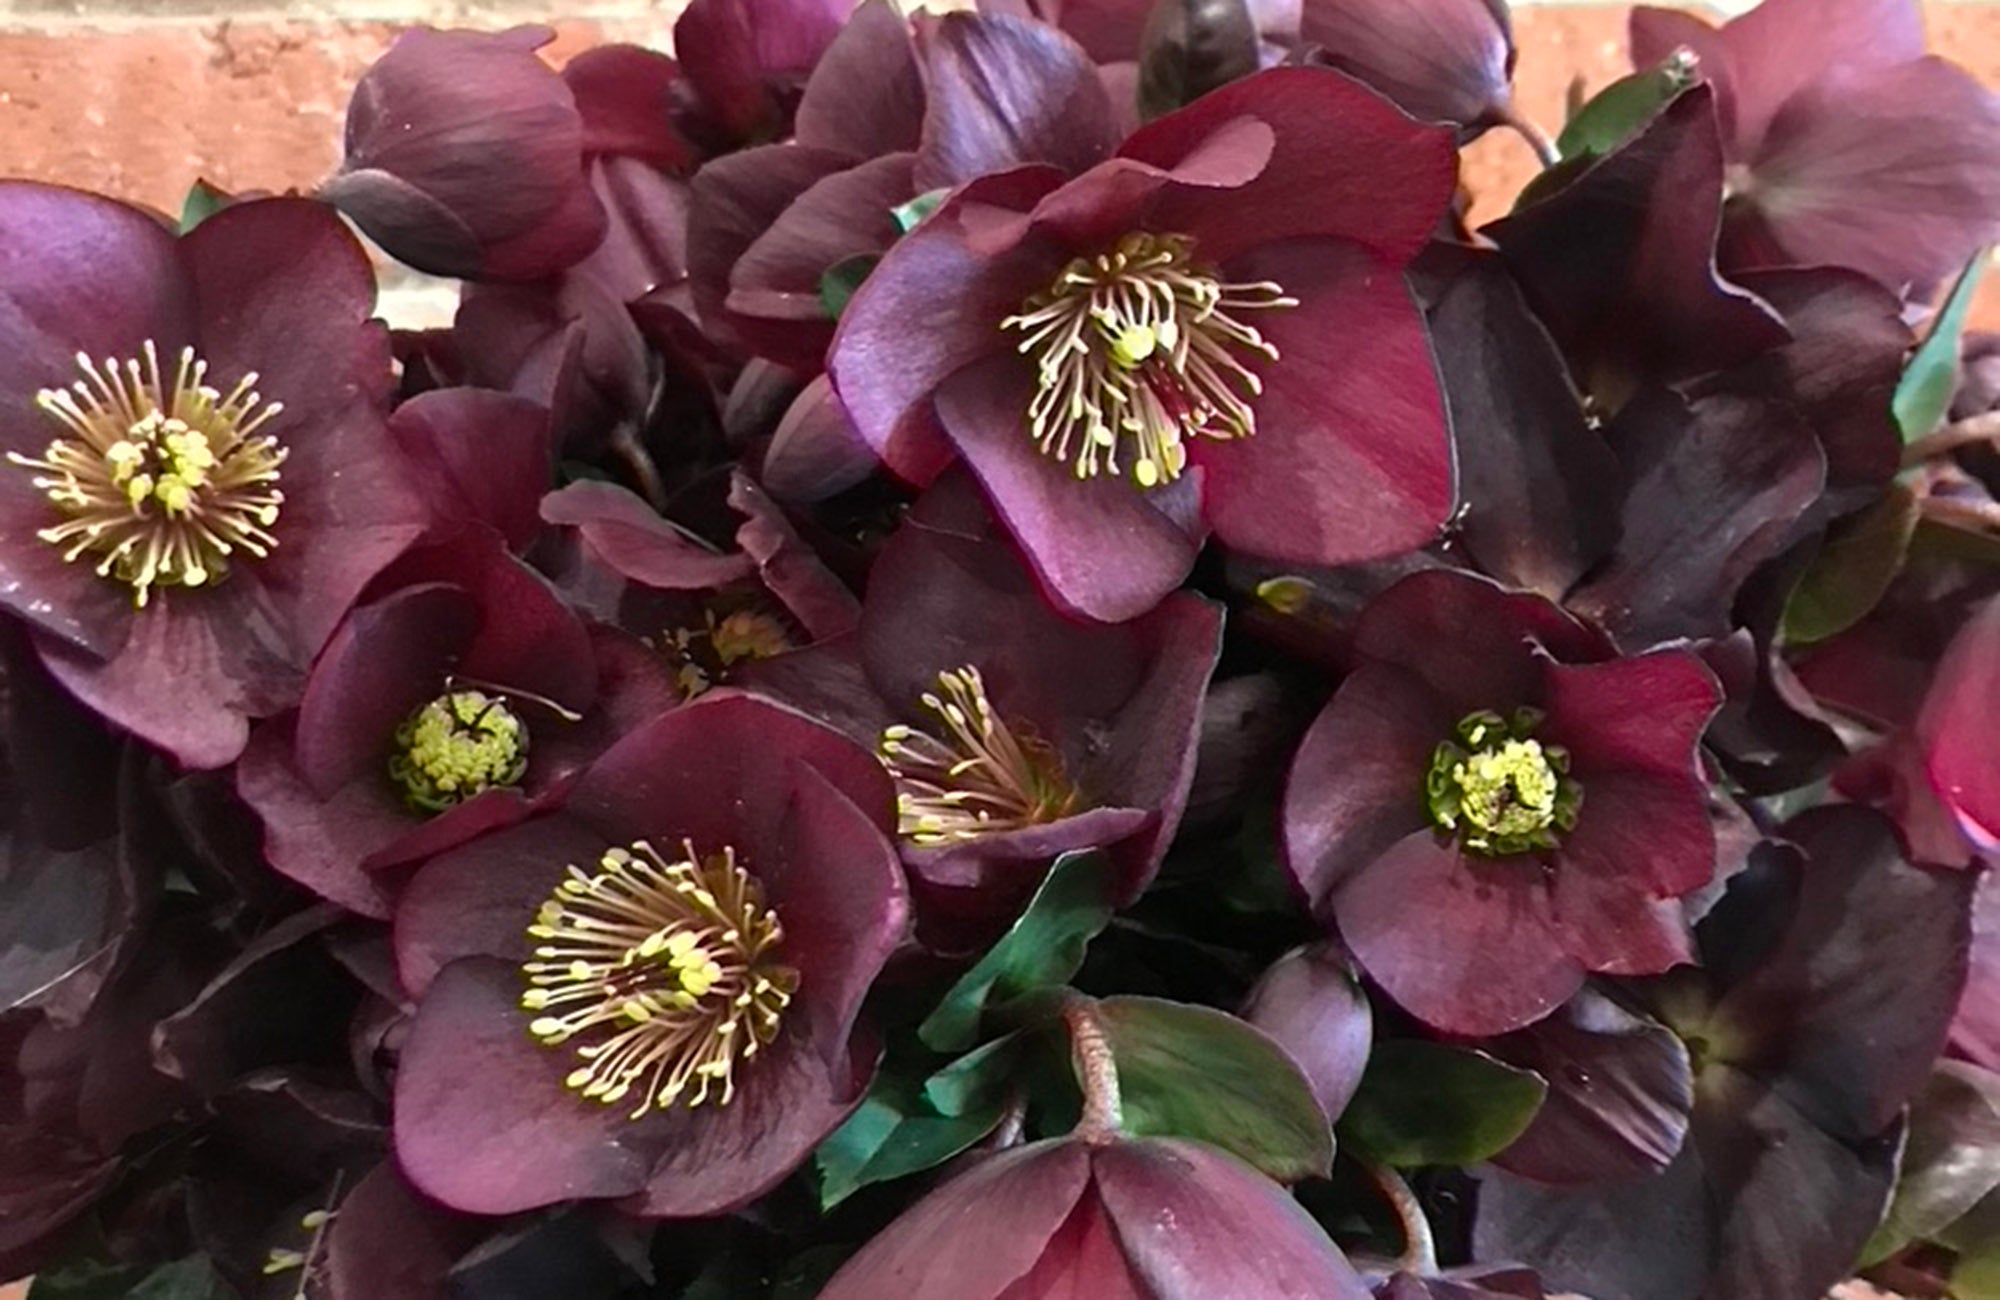 Bunches of Hellebore flowers